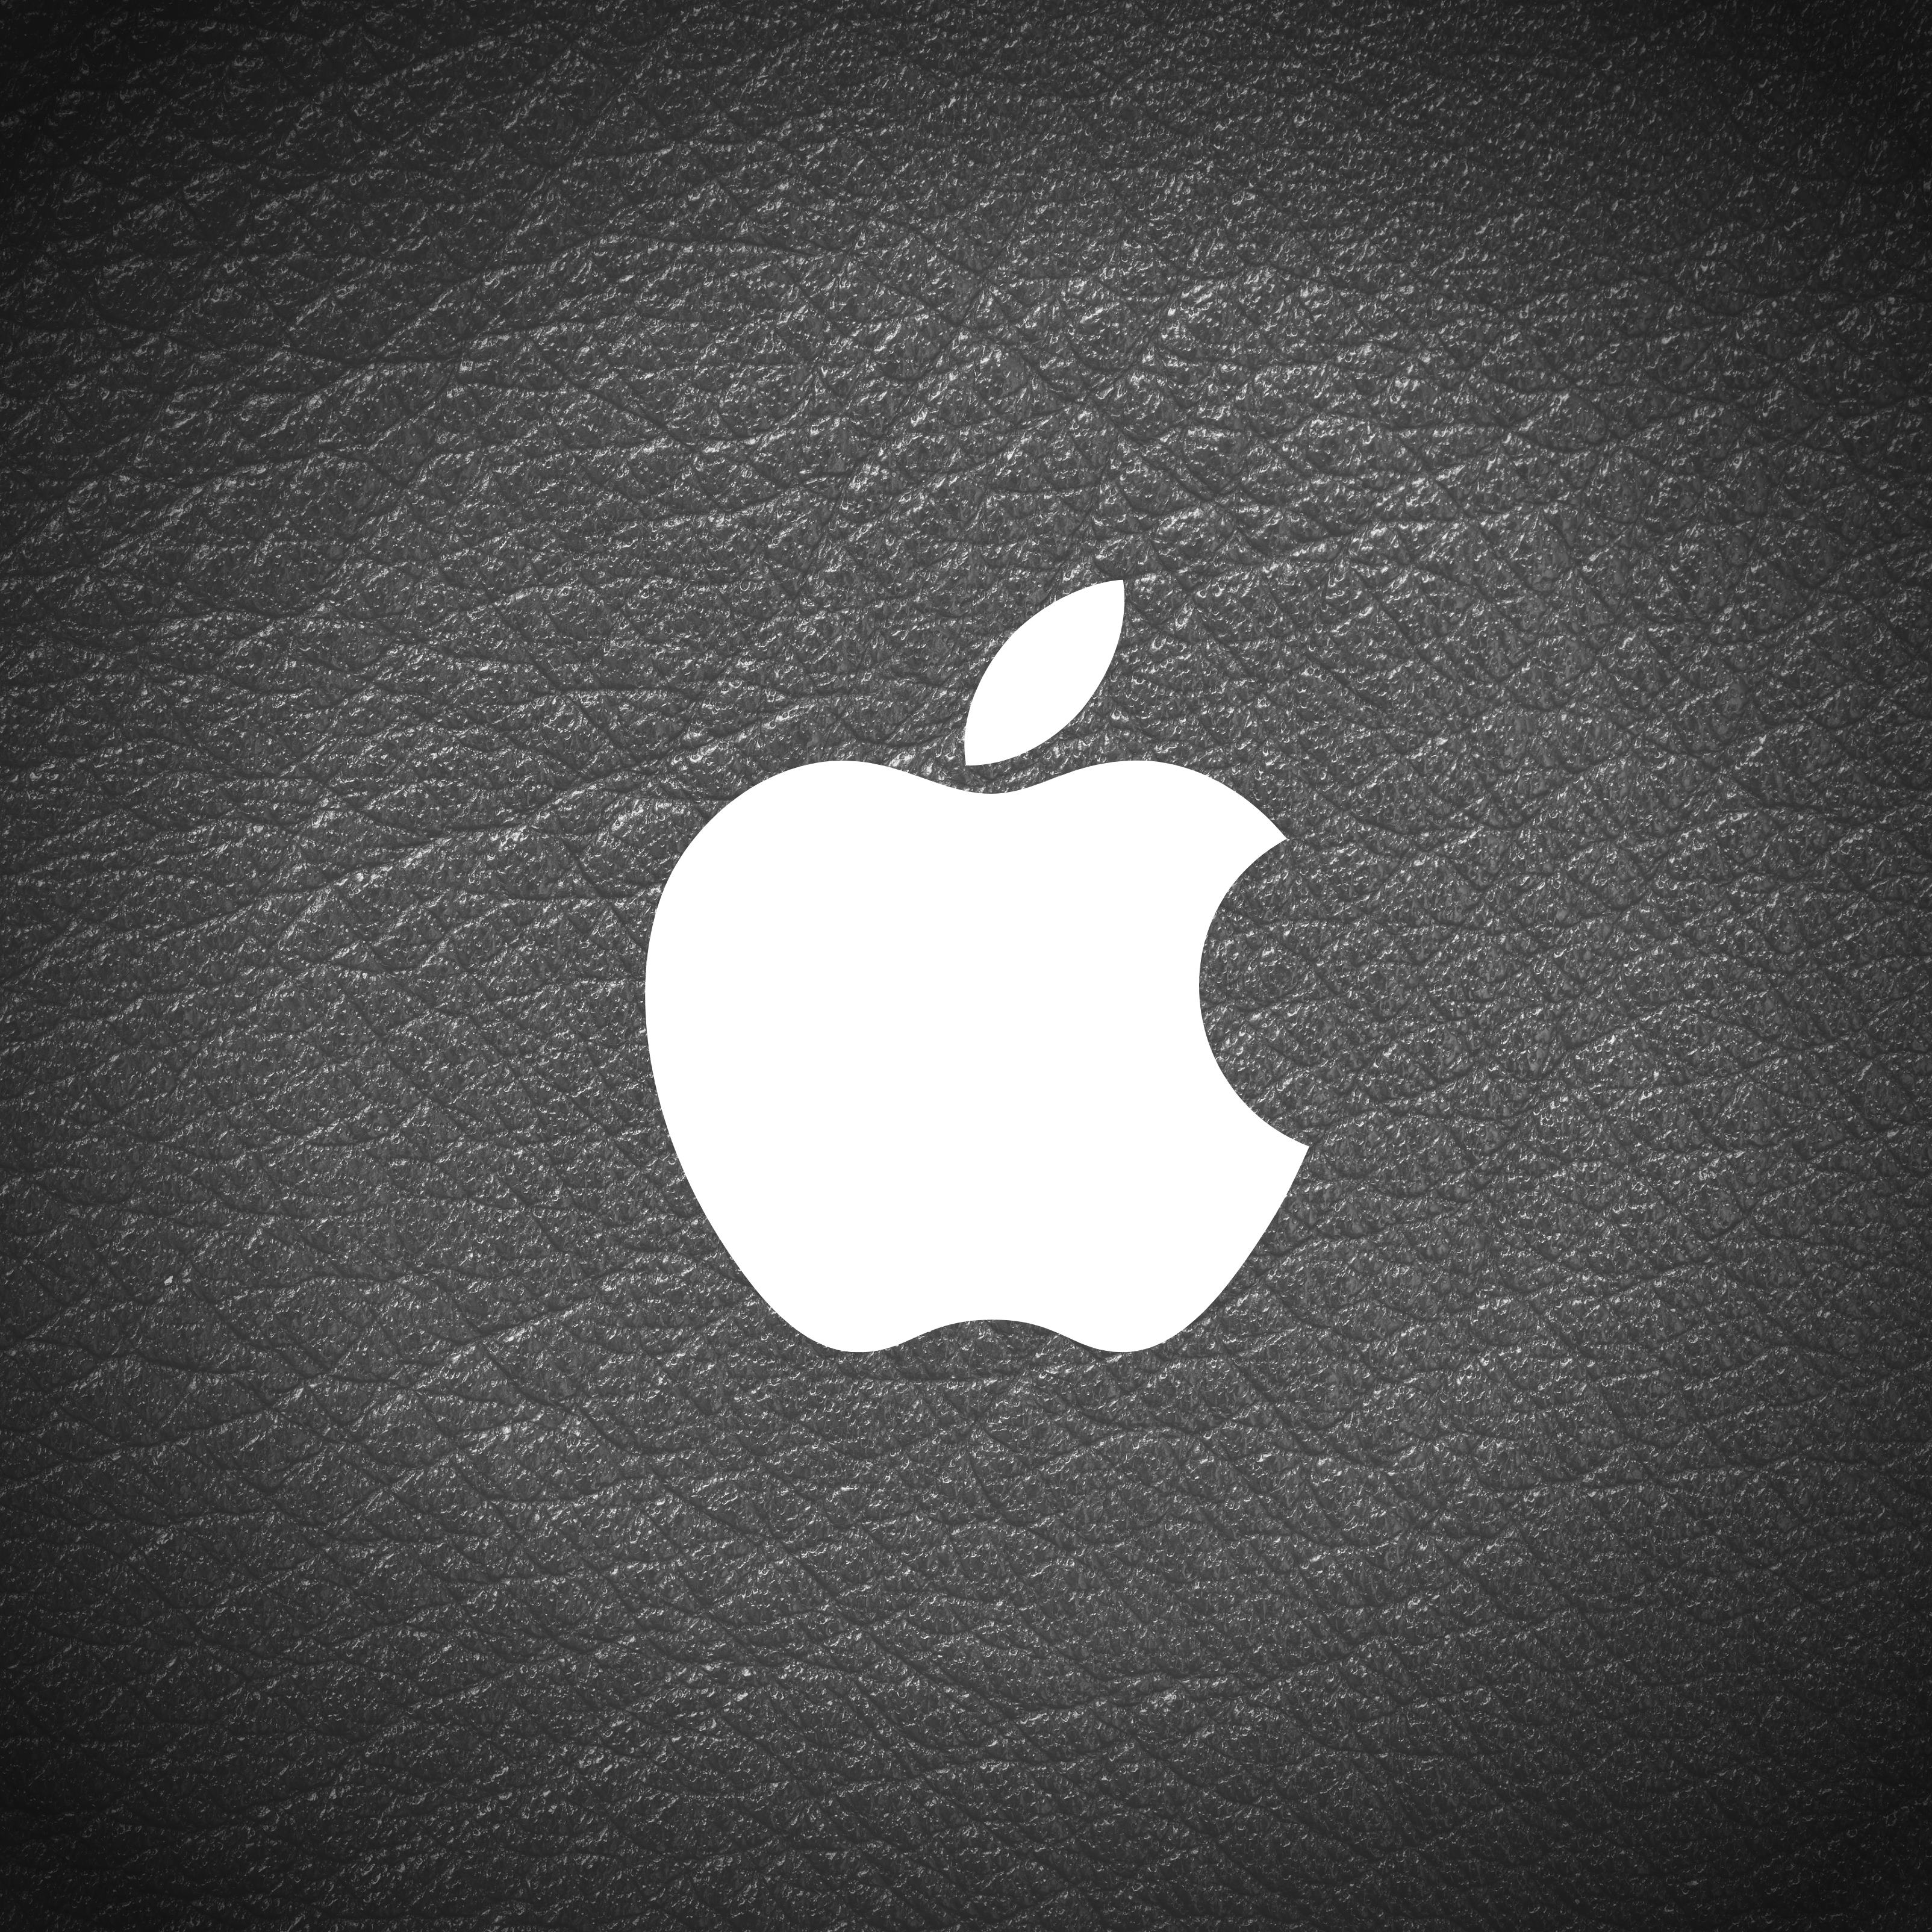 iPad Pro wallpapers Apple Logo Leather Black and White iPad Wallpaper